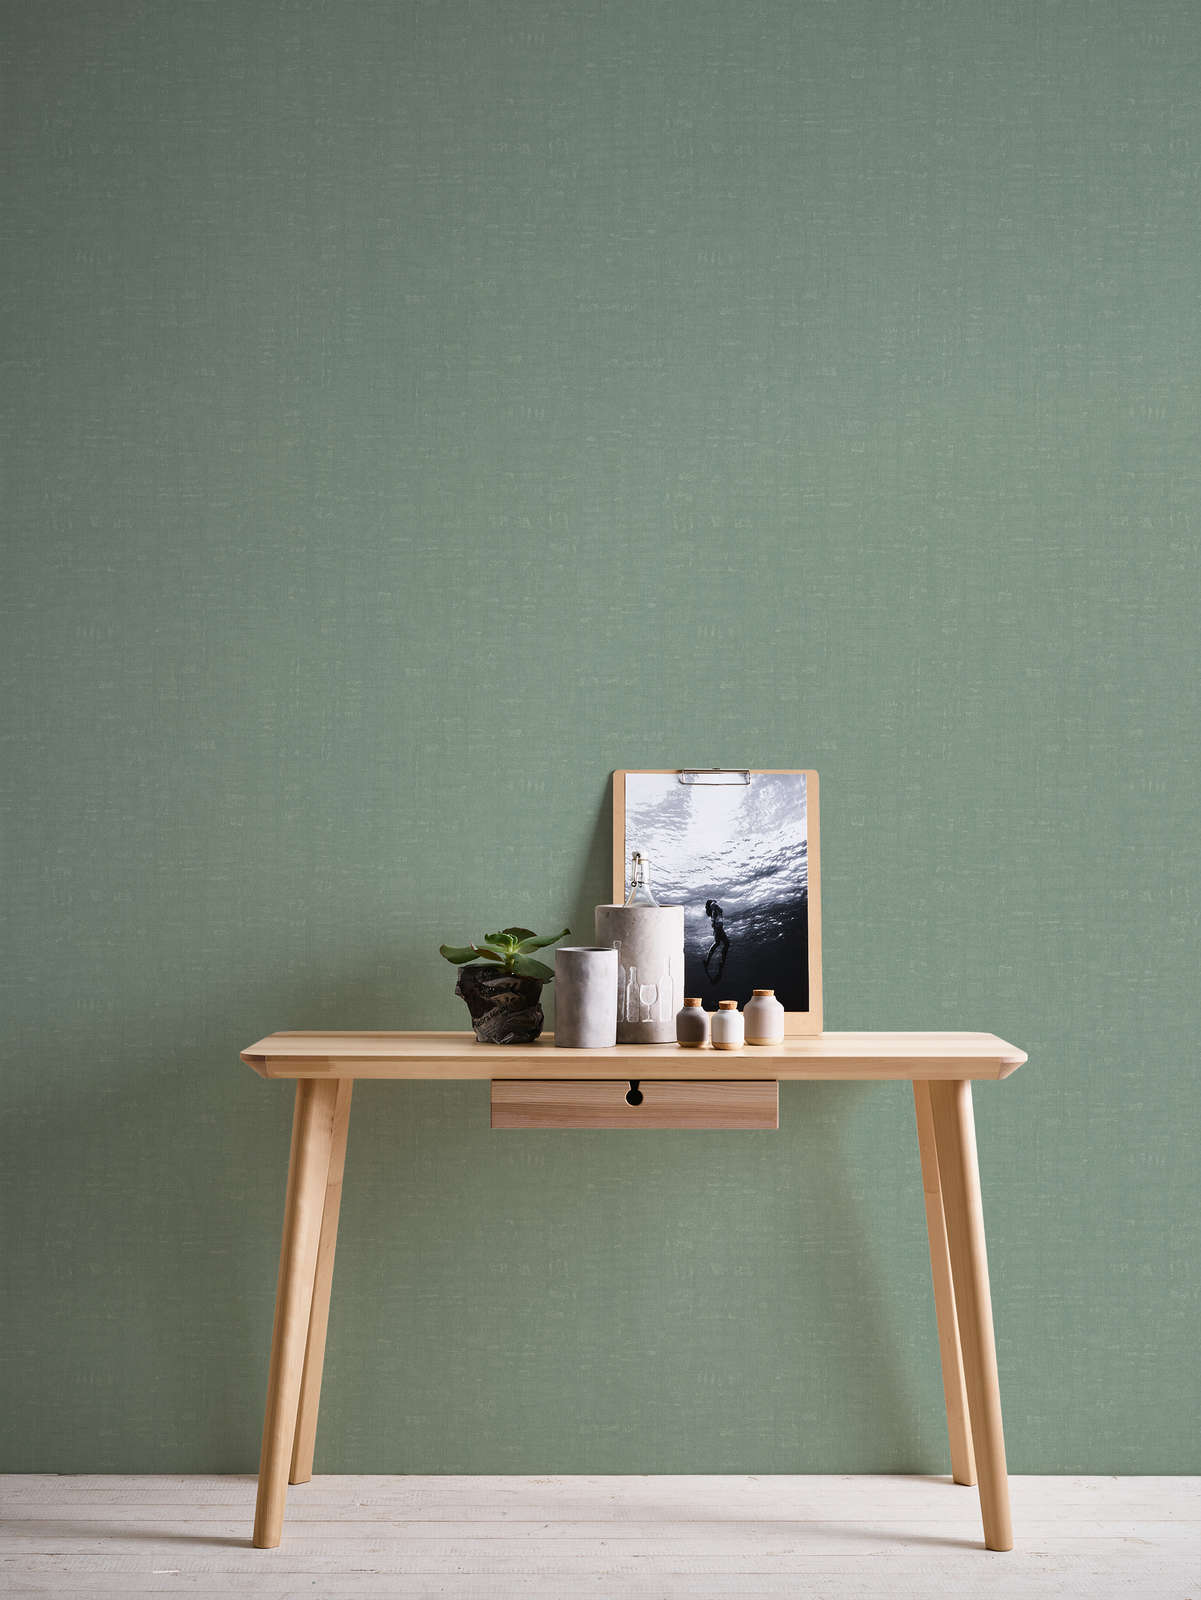             Green wallpaper plain and mottled with texture embossing
        